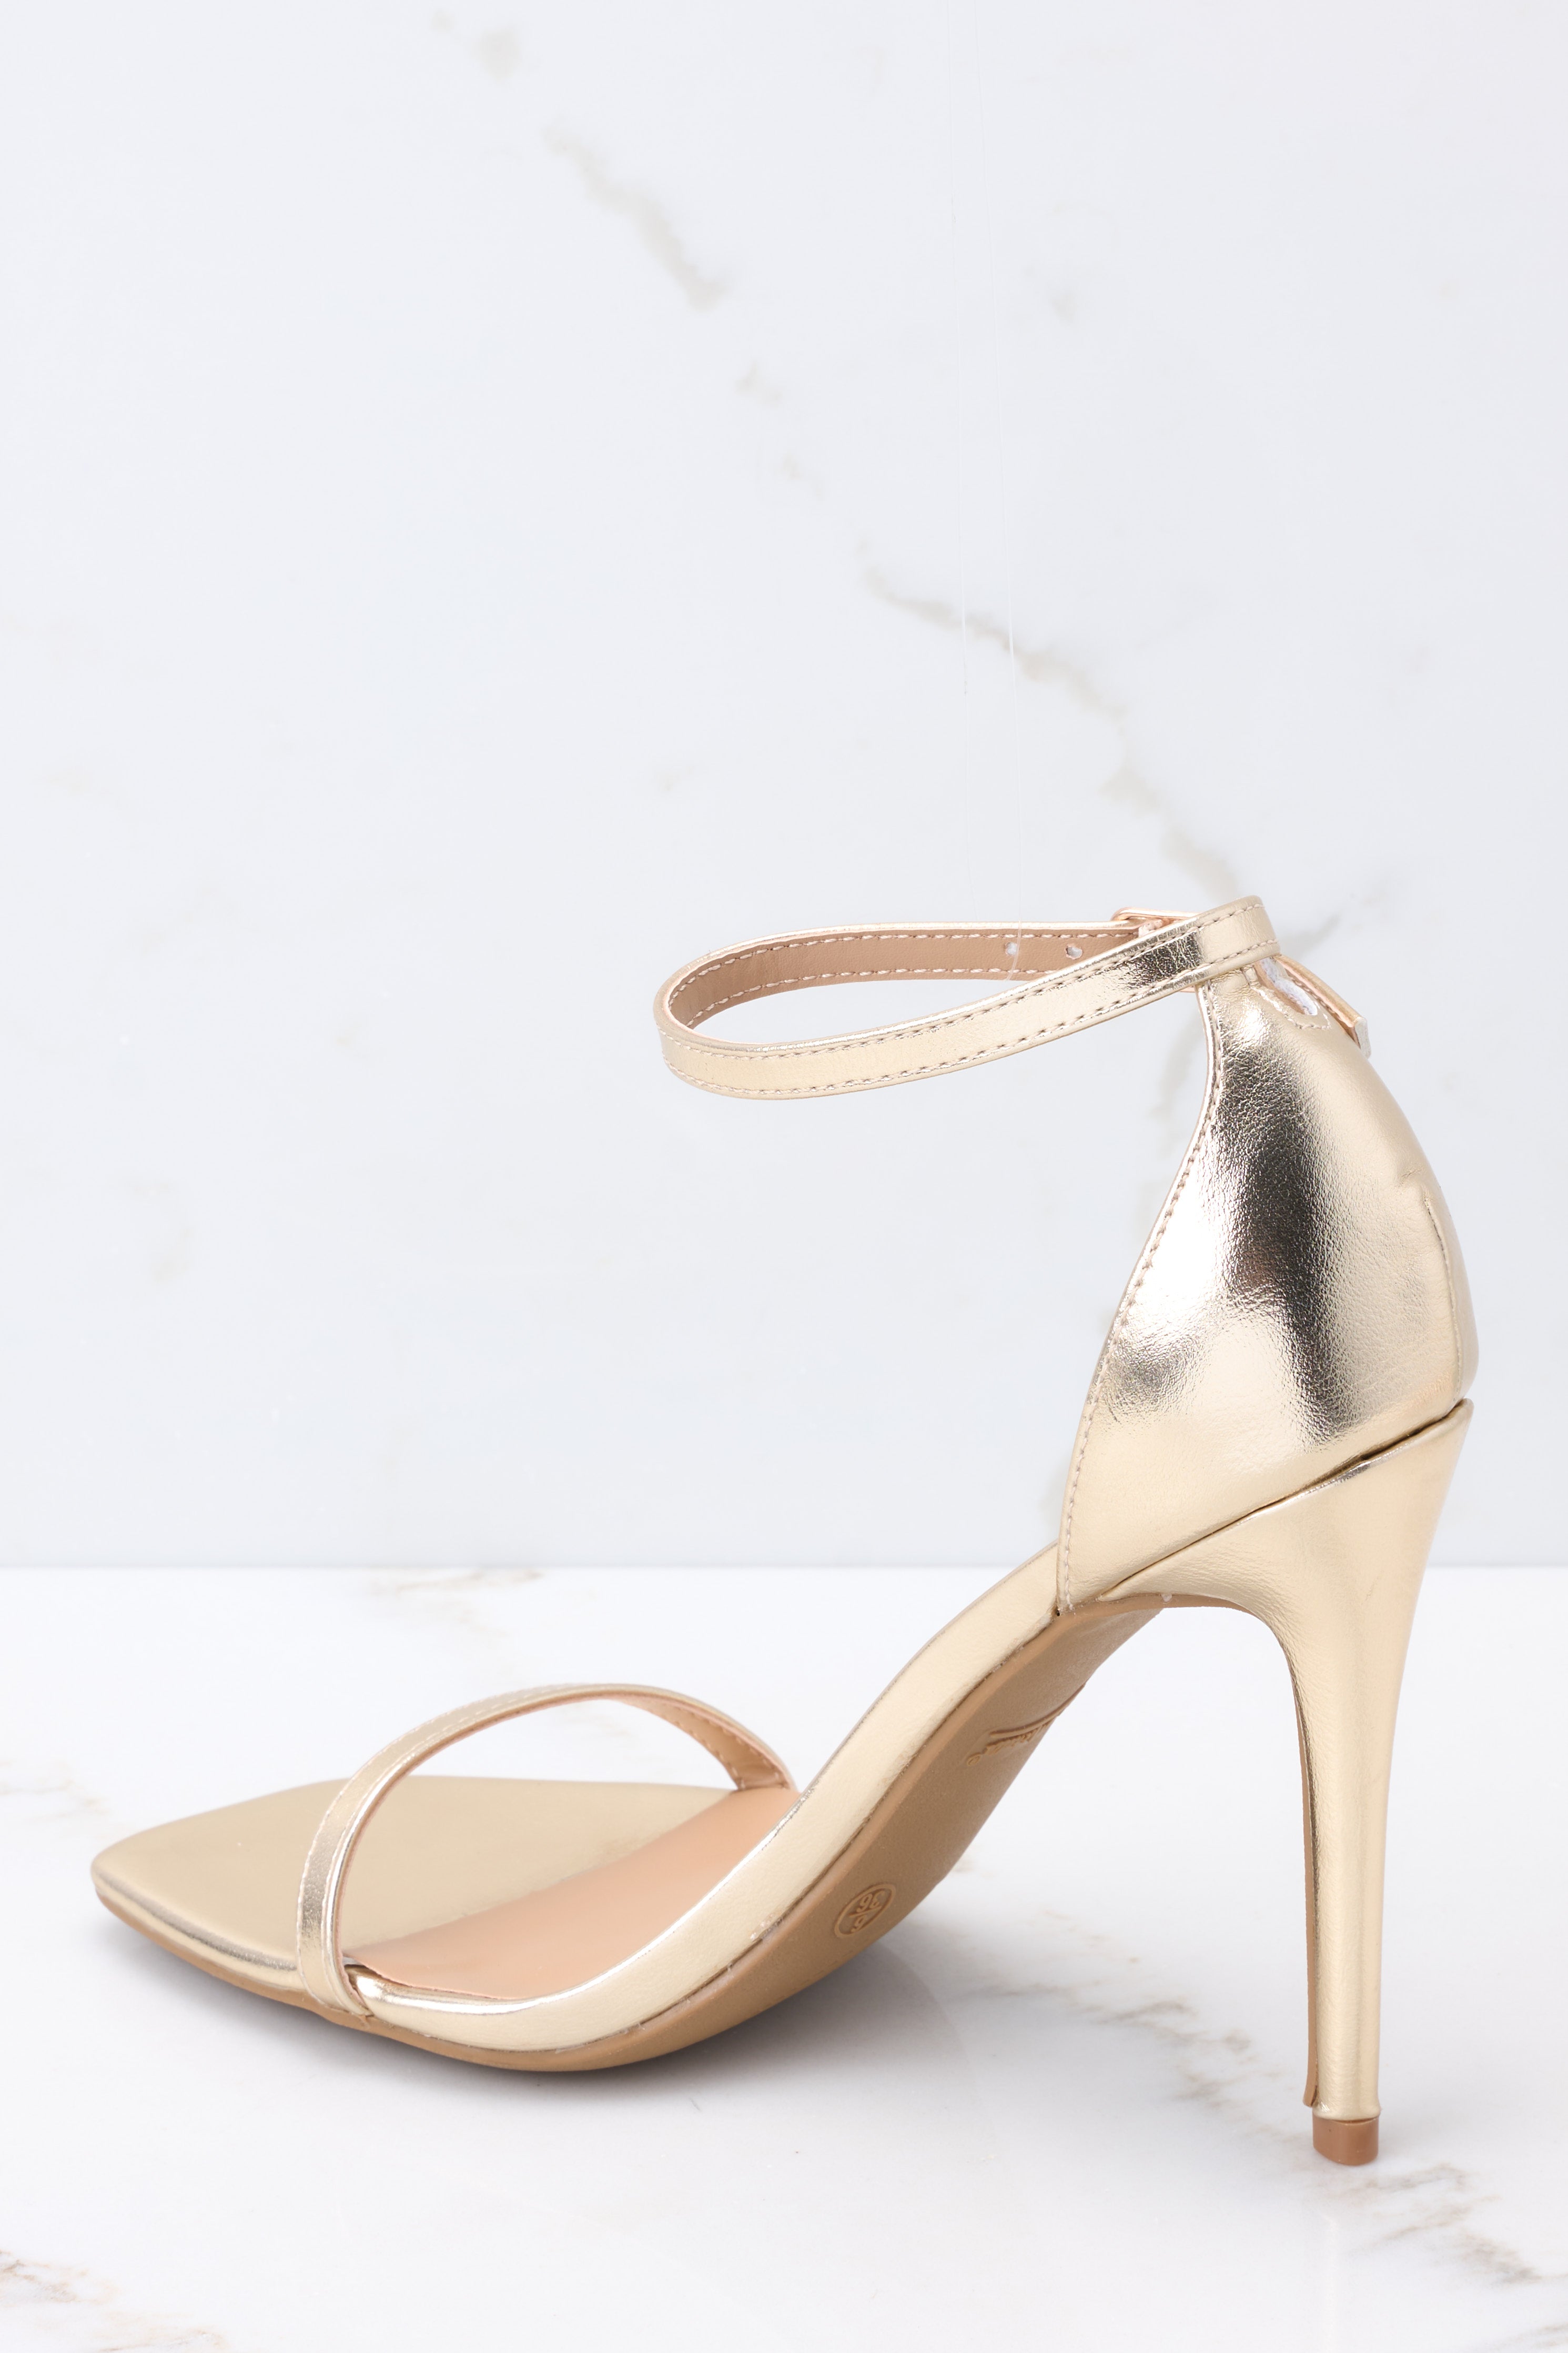 High heeled shoe Free Stock Photos, Images, and Pictures of High heeled shoe